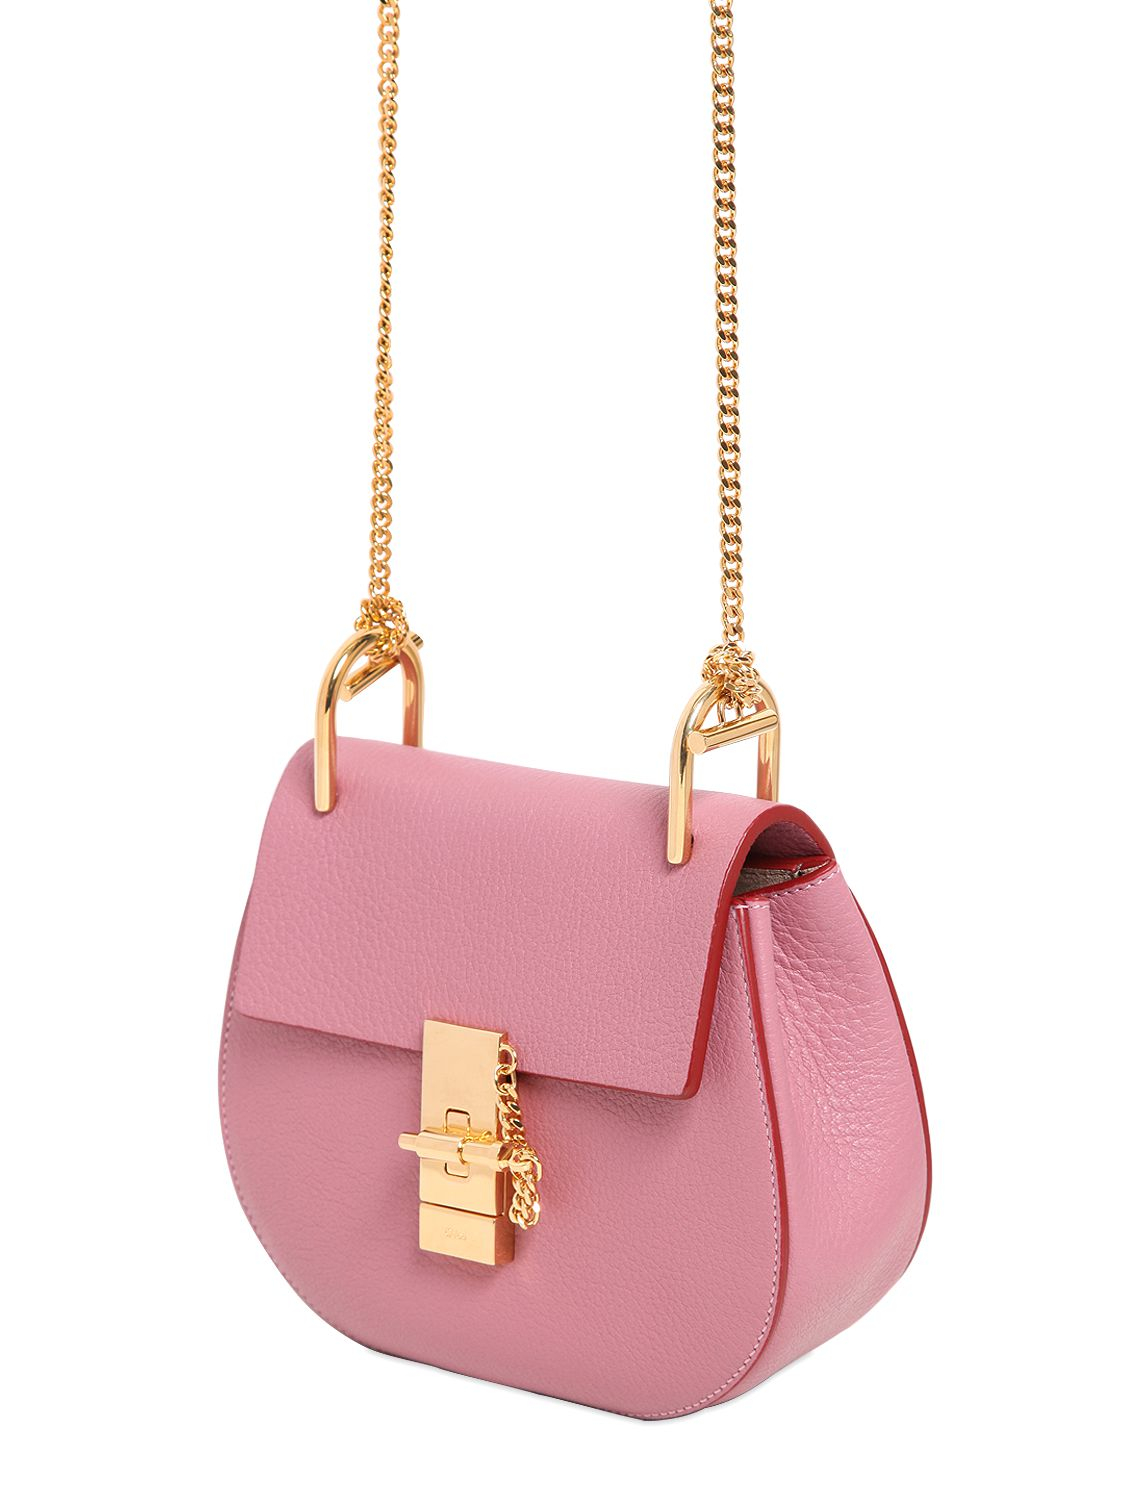 Chloé Mini Drew Grained Nappa Leather Bag in Faded Rose (Pink) - Lyst